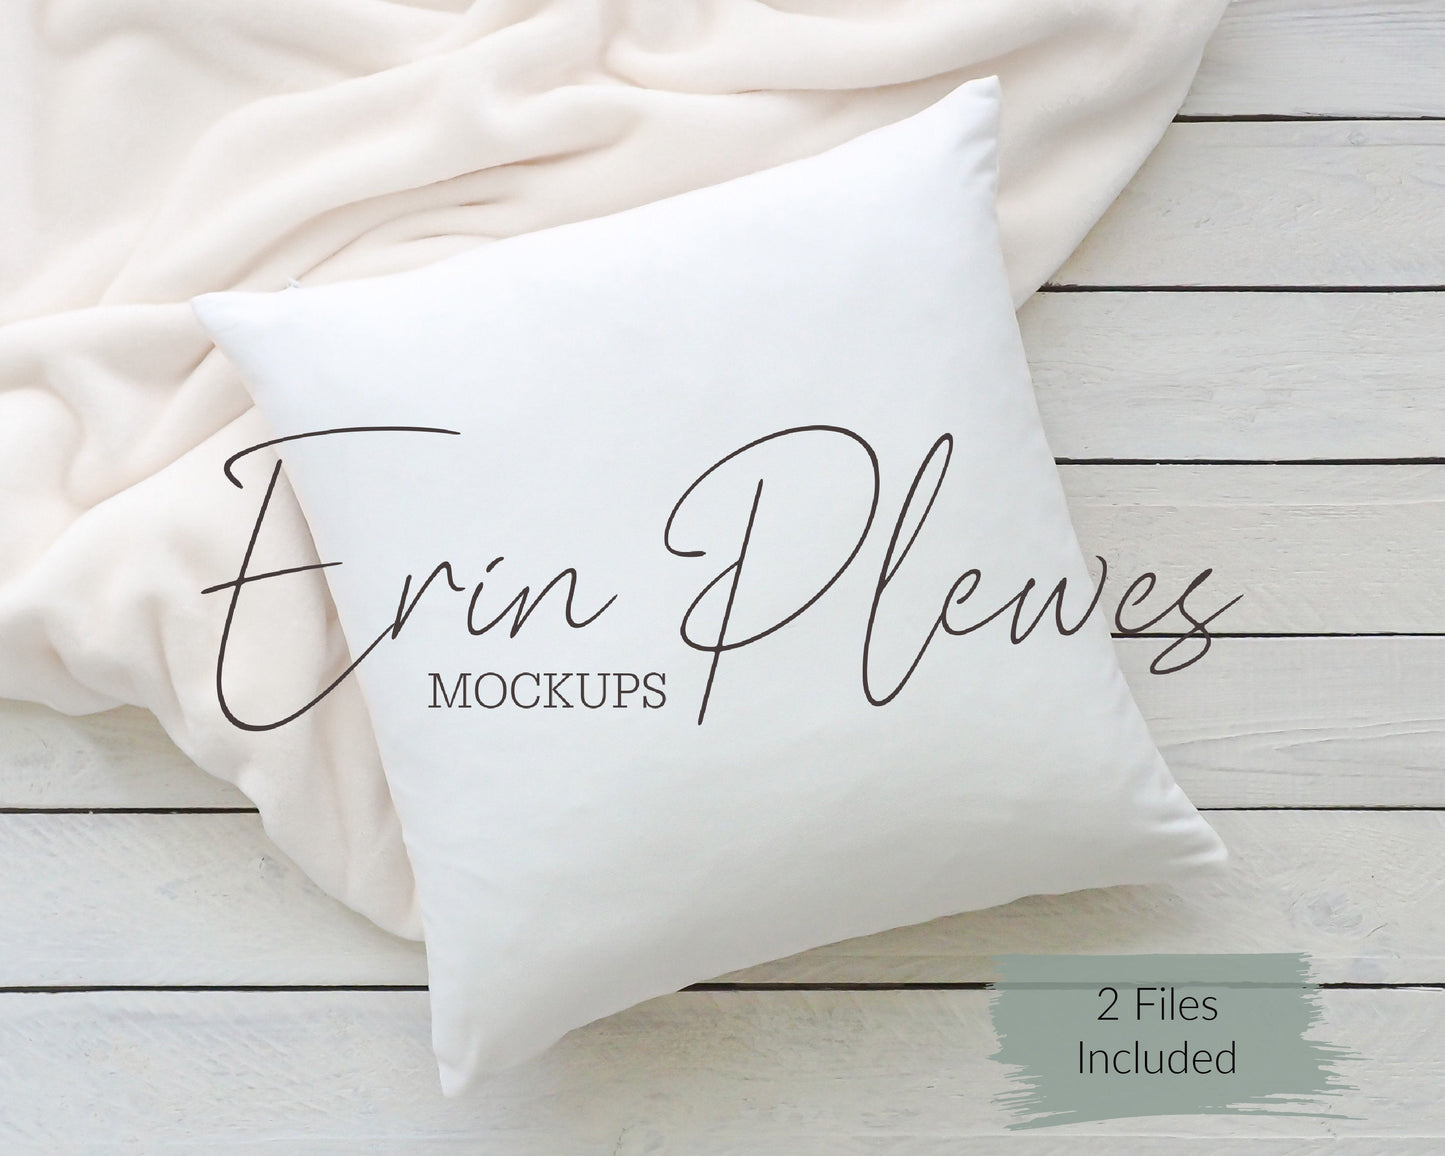 Pillow Mock ups, Pillow case mockup with white blanket on rustic wood floor, Minimalist cushion stock photo, Jpeg Instant Digital Download